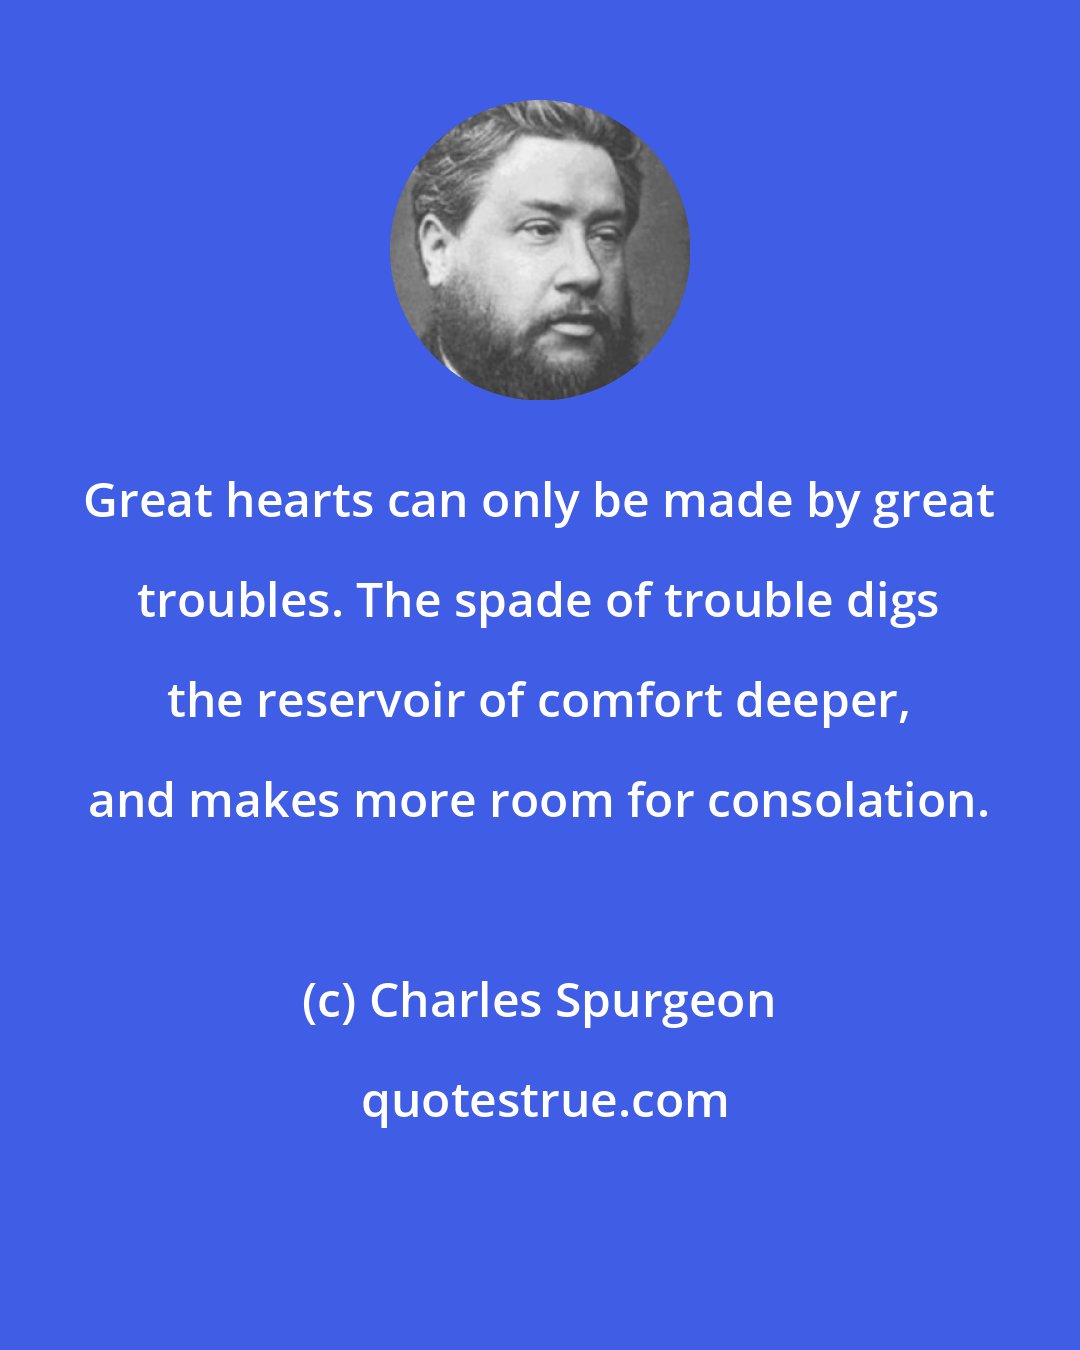 Charles Spurgeon: Great hearts can only be made by great troubles. The spade of trouble digs the reservoir of comfort deeper, and makes more room for consolation.